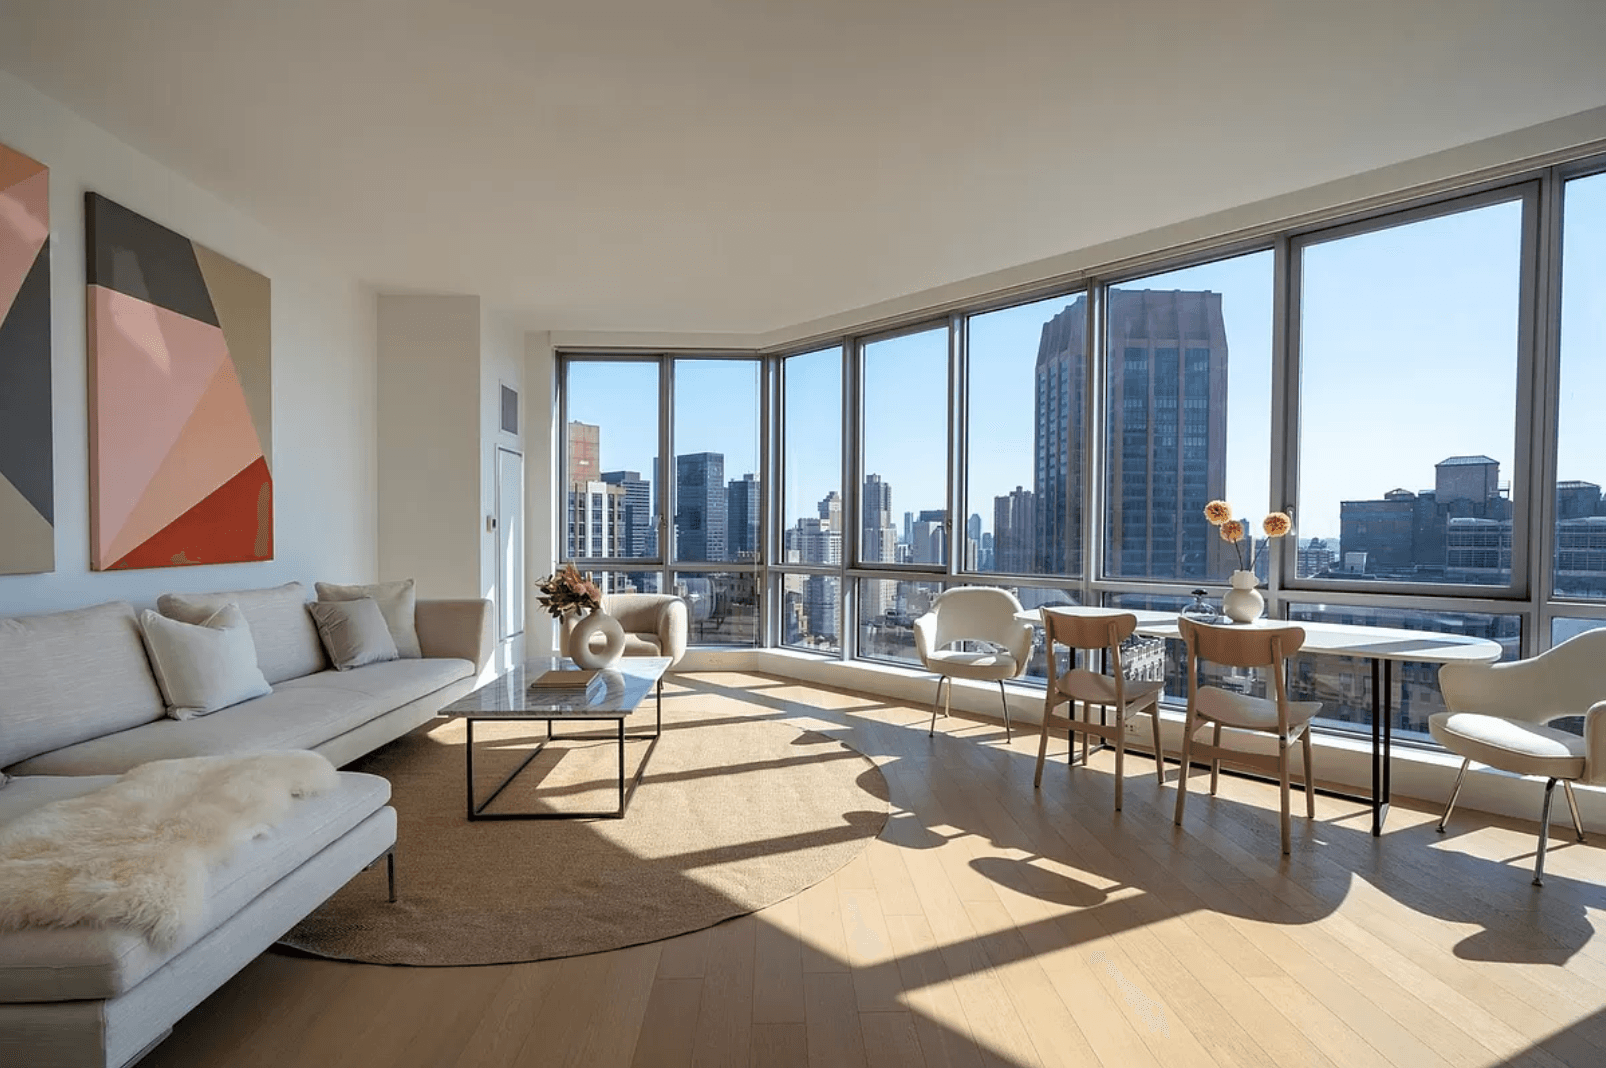 Over-Sized Corner 1 Bed/1 Bath New NoMad Luxury Residential Tower, Living Room Has Triple Northern, Eastern, & Southern Exposures, Ample Closet Space, W/D in Unit